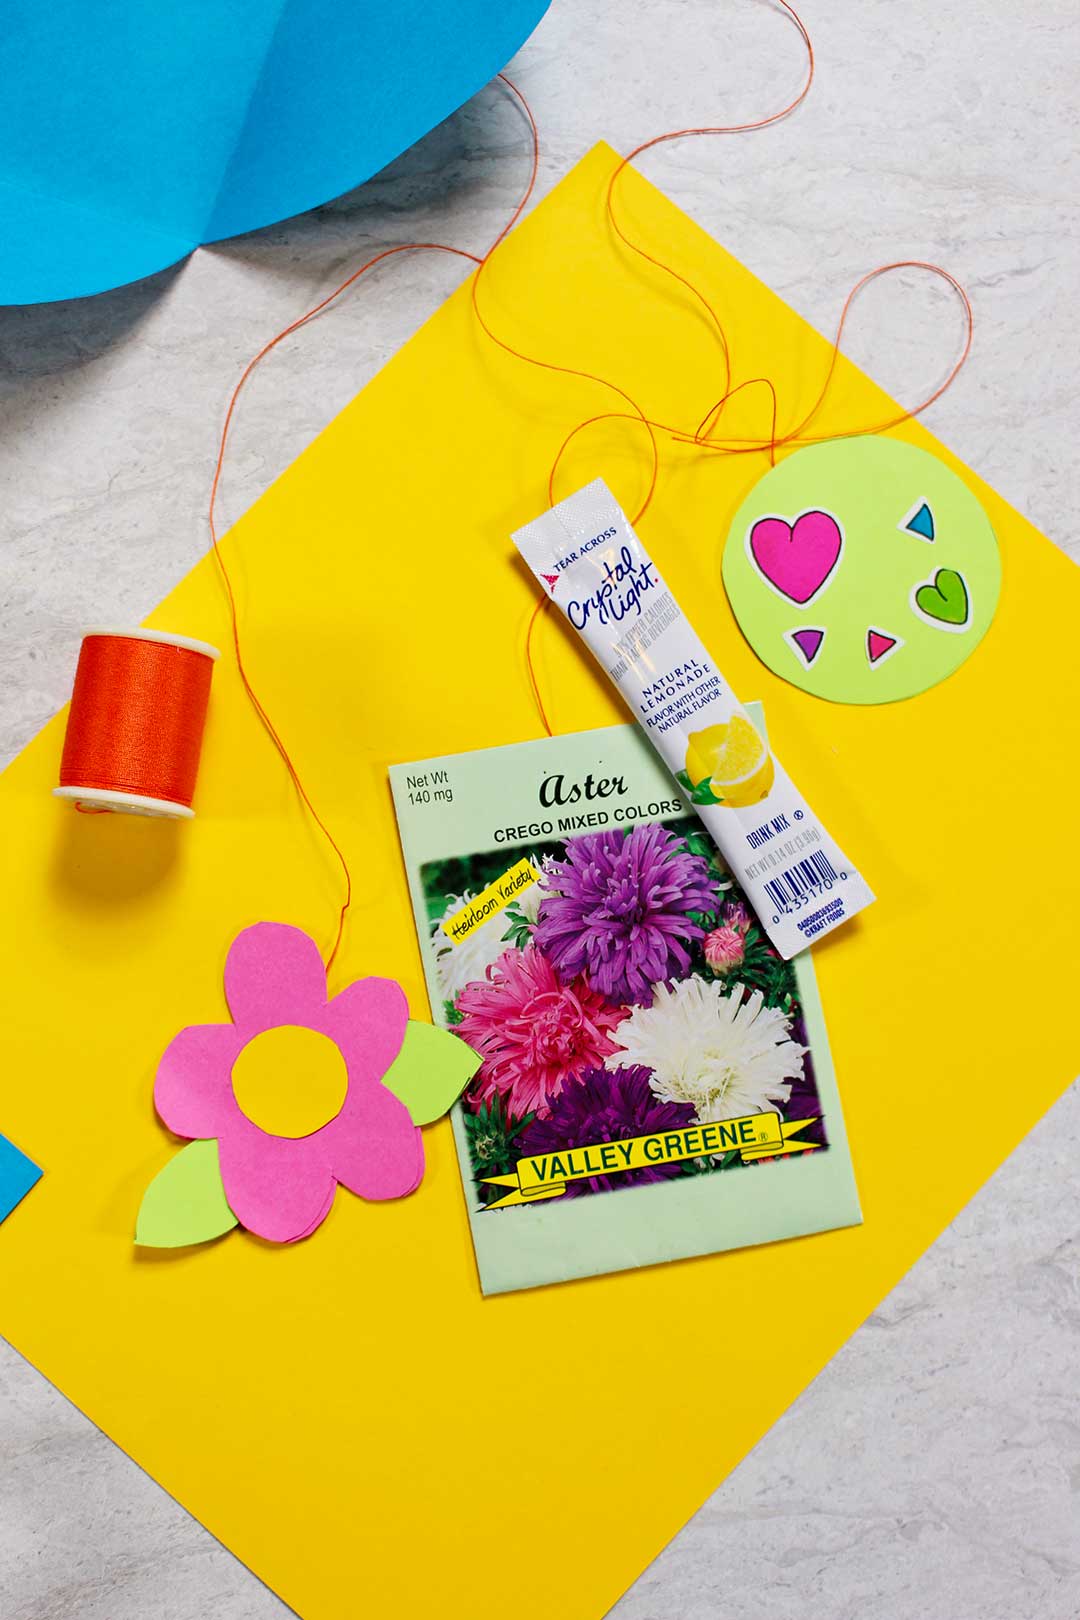 A drink packet, paper flower, flower seed packet, and heart stickers attached to red string.